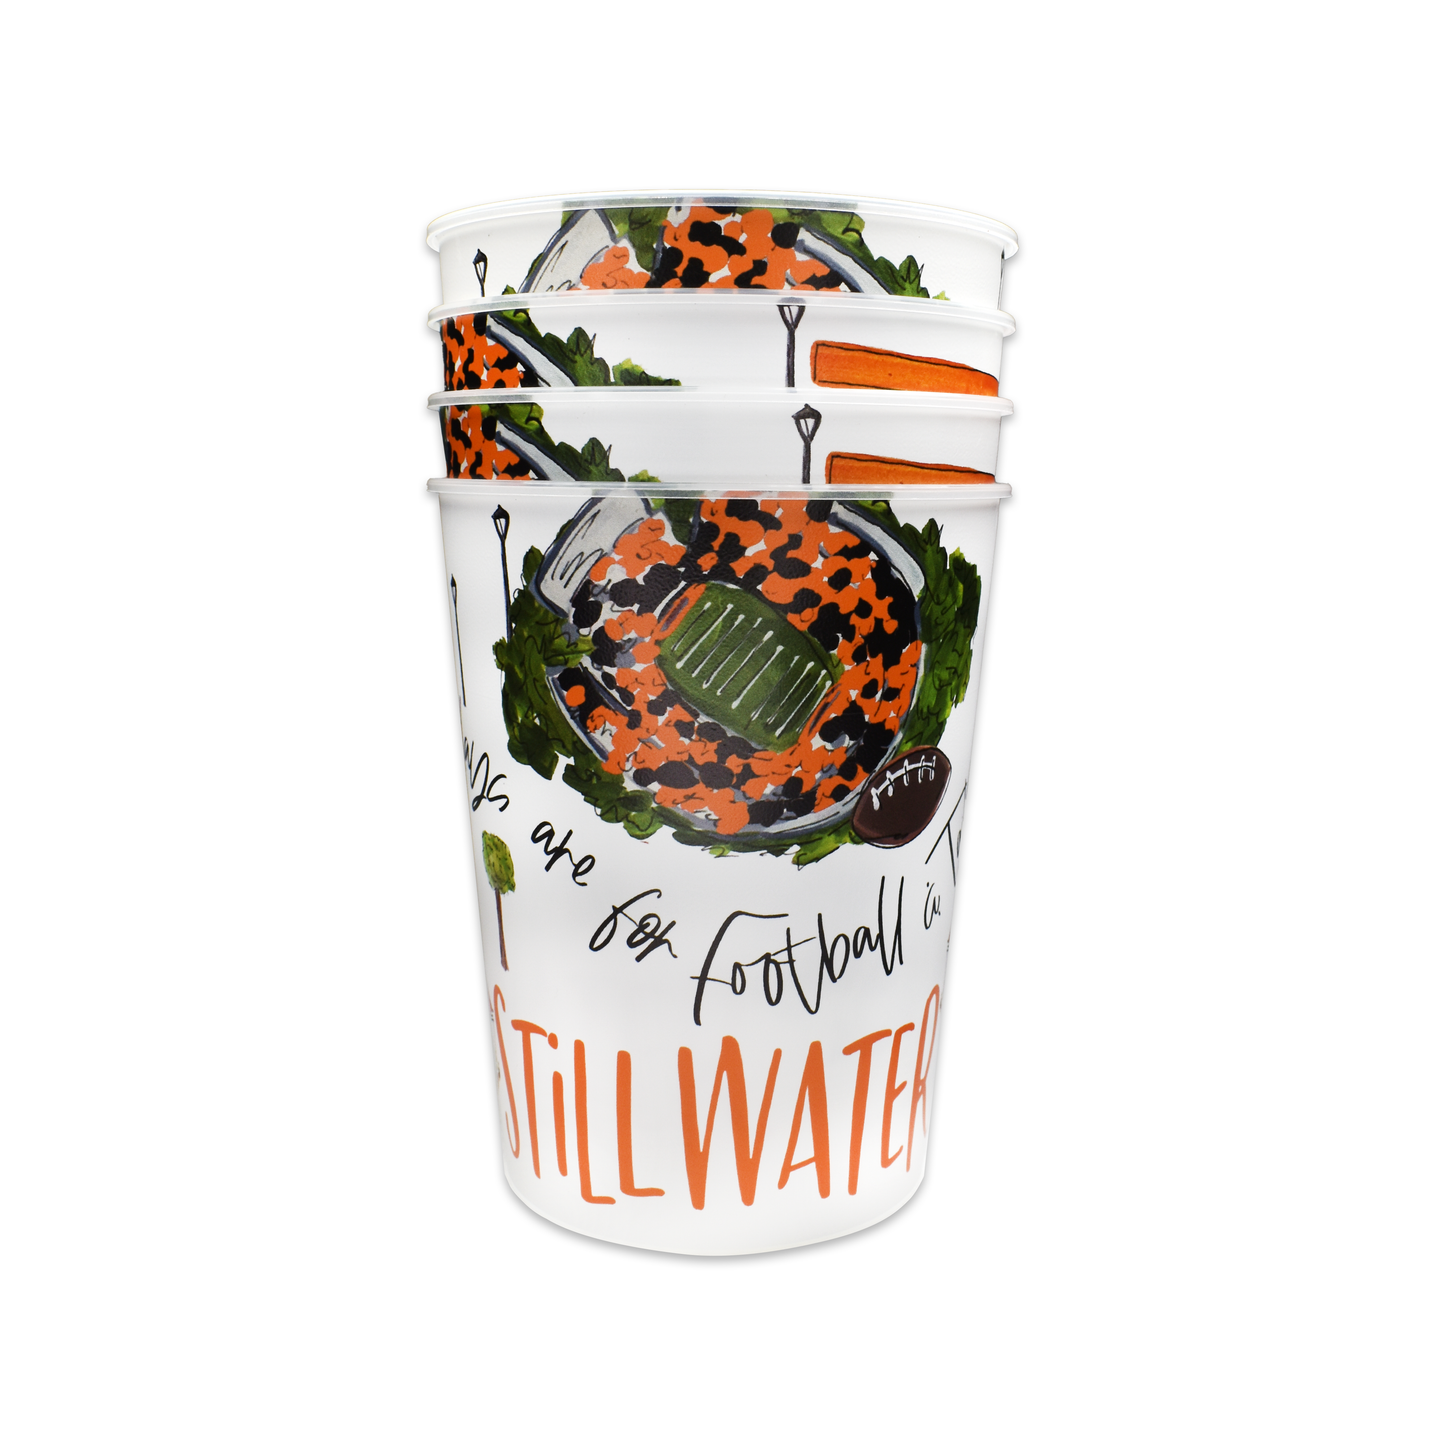 Stillwater Reusable Party Cups, Set of 4